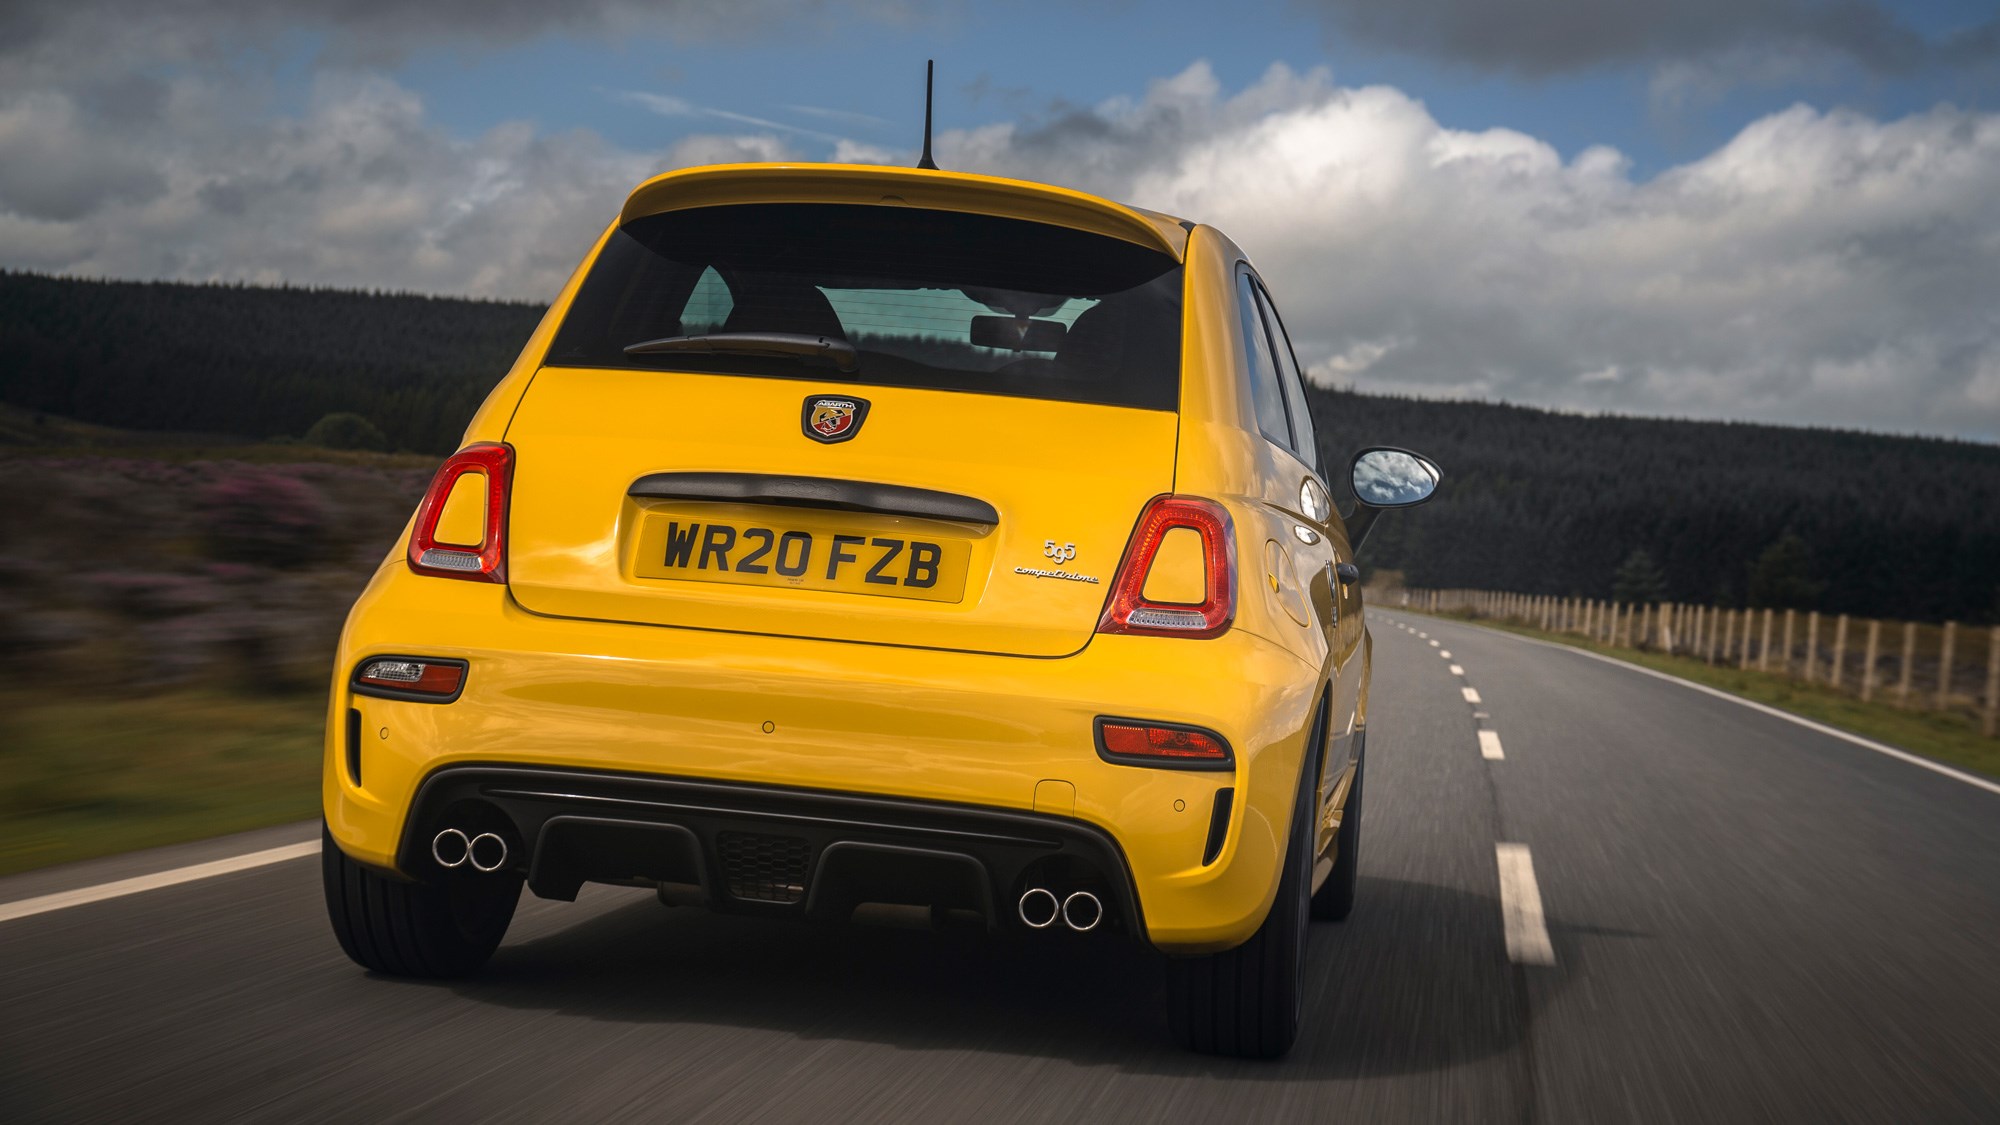 Review: Test driving the Fiat Abarth 595 Competizione, the mouse that roars